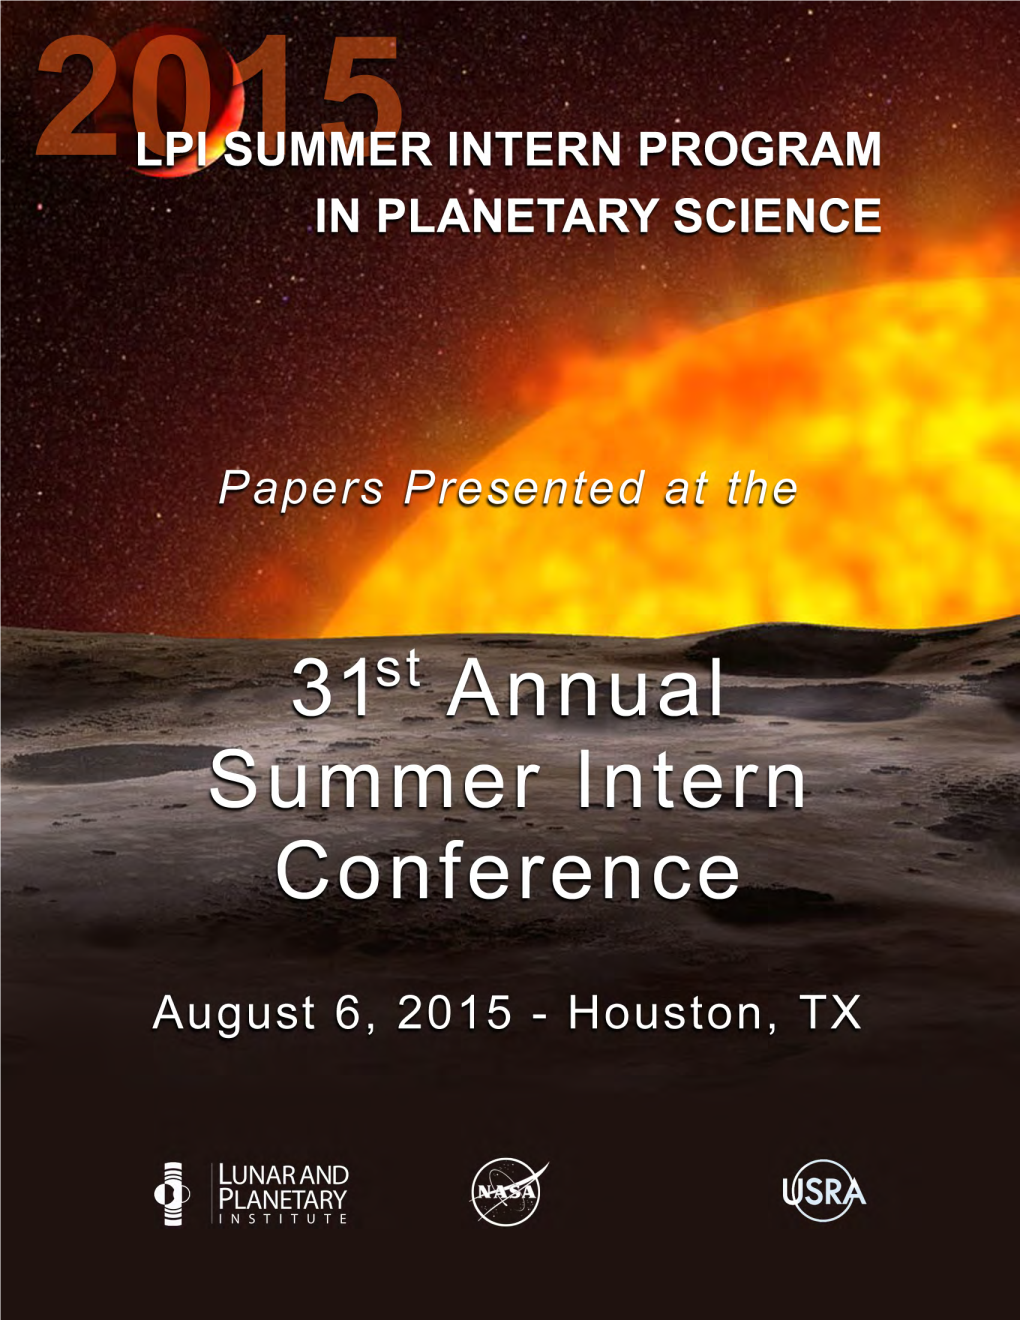 Thirty-First Annual Summer Intern Conference